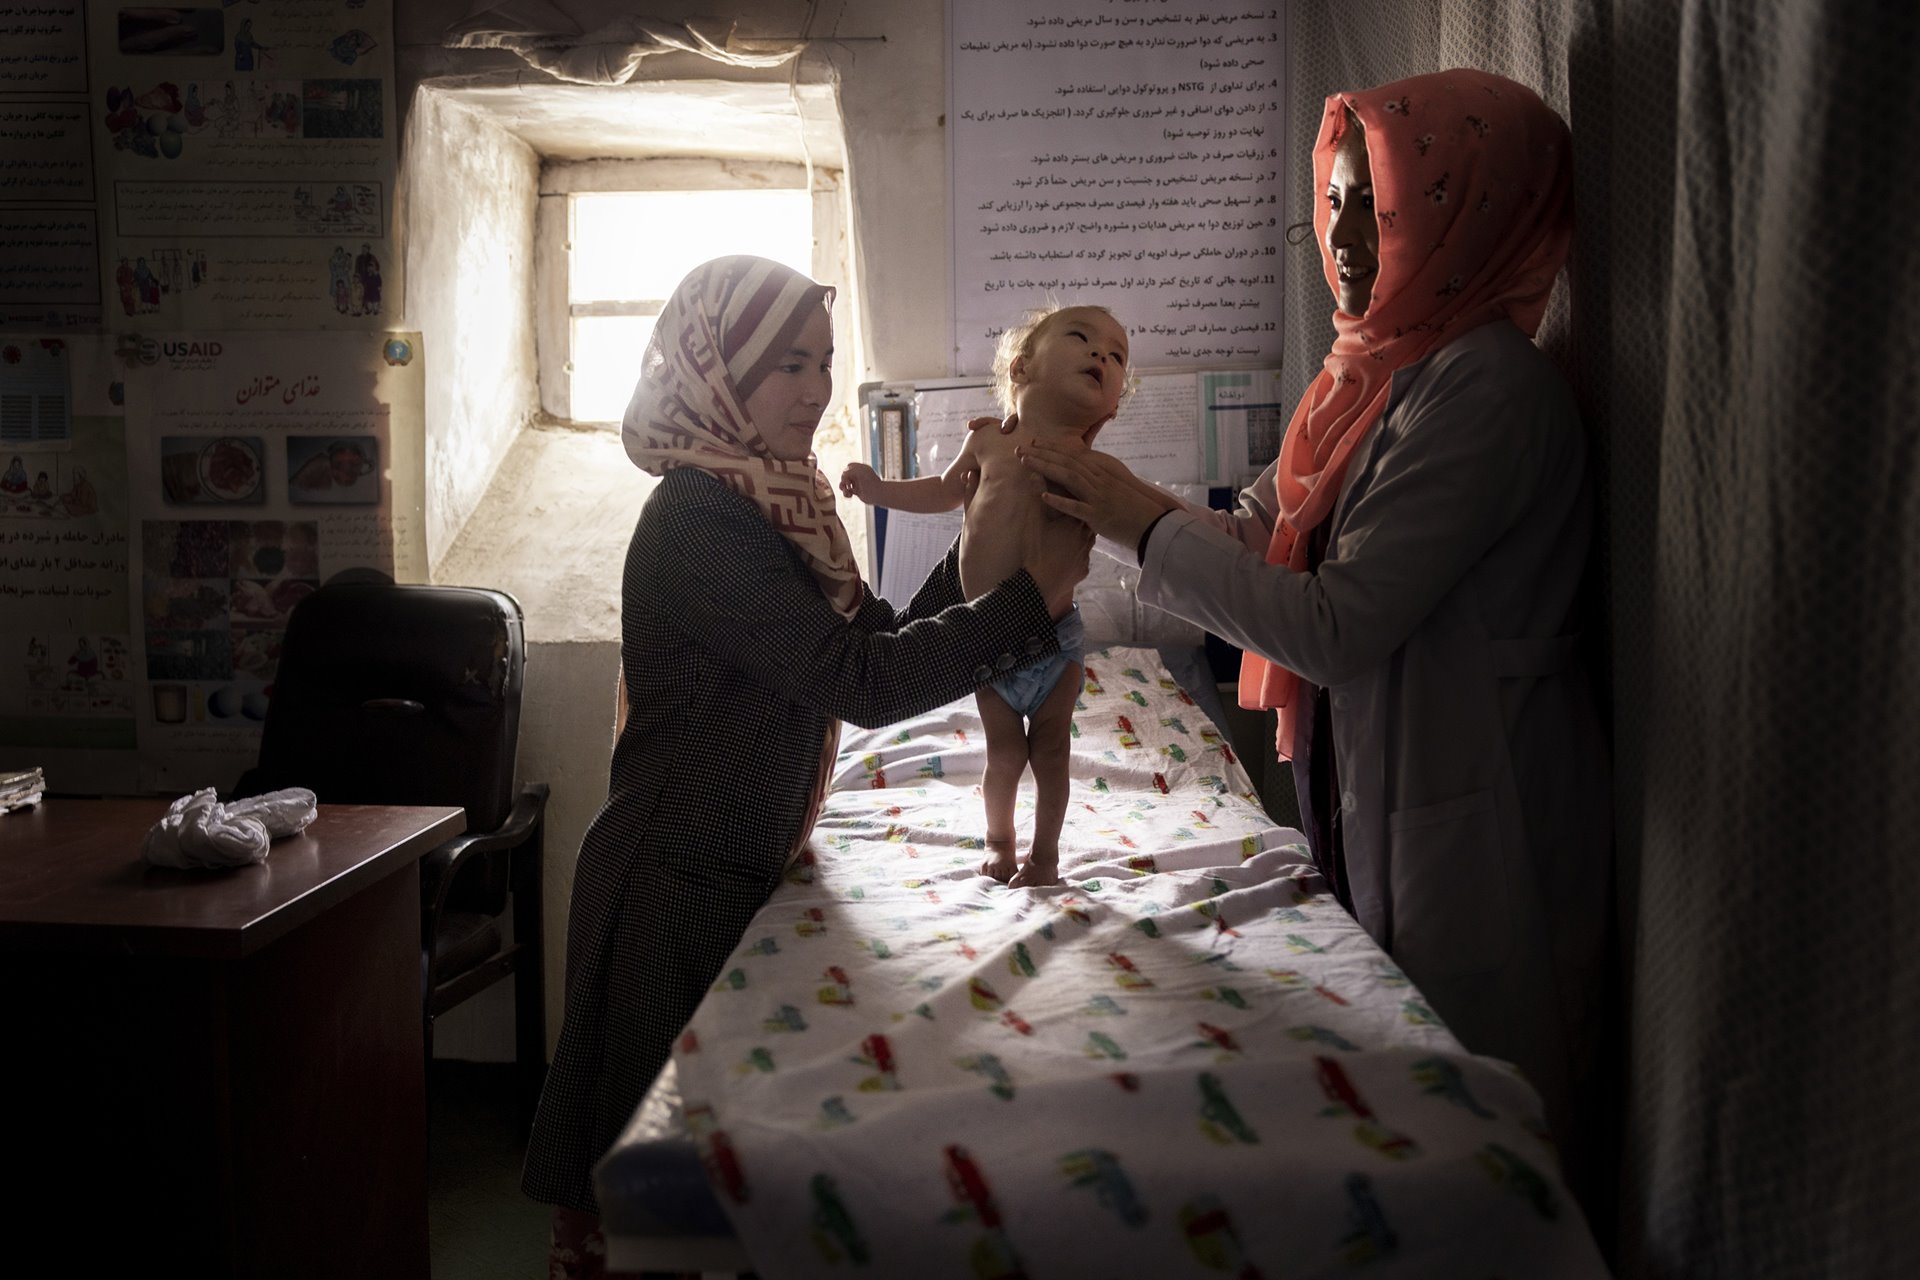 Hojatullah (11 months old) is examined at a small clinic in Alibeg, near Bamiyan, Afghanistan. Although very young, he is already suffering from severe malnutrition, a common problem in this village where most survive on a daily diet of white bread and tea.